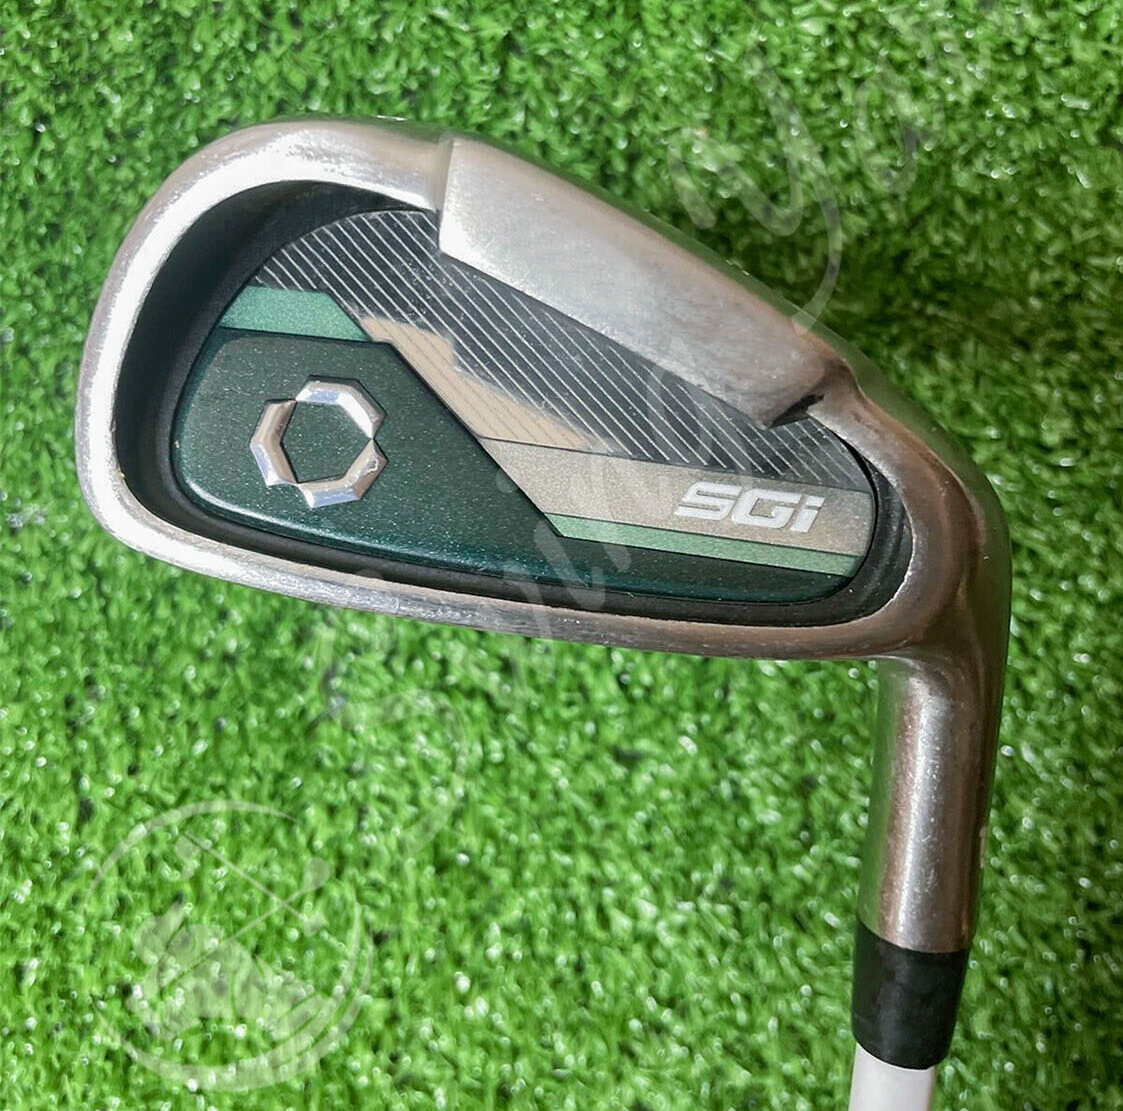 The Wilson Women’s SGI Profile Iron for testing at the golf course